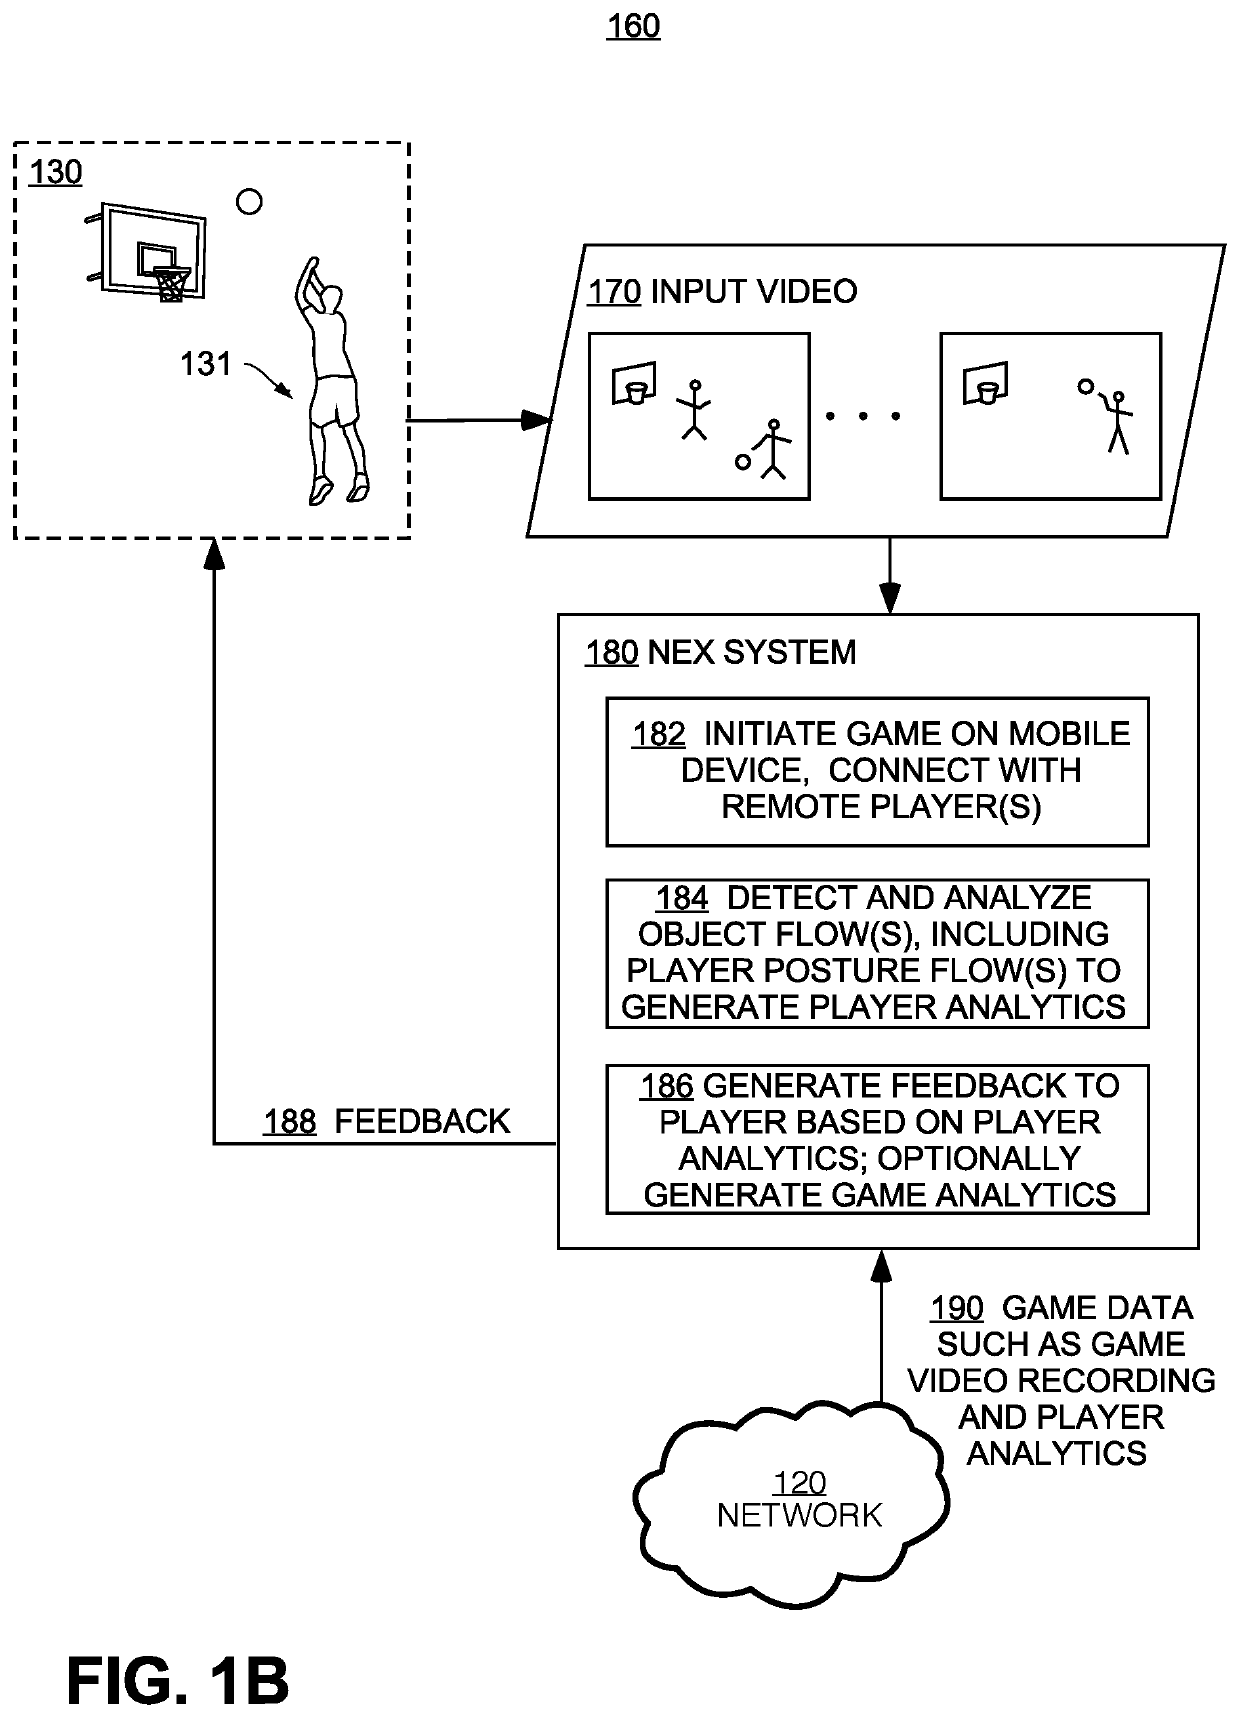 Remote multiplayer interactive physical gaming with mobile computing devices